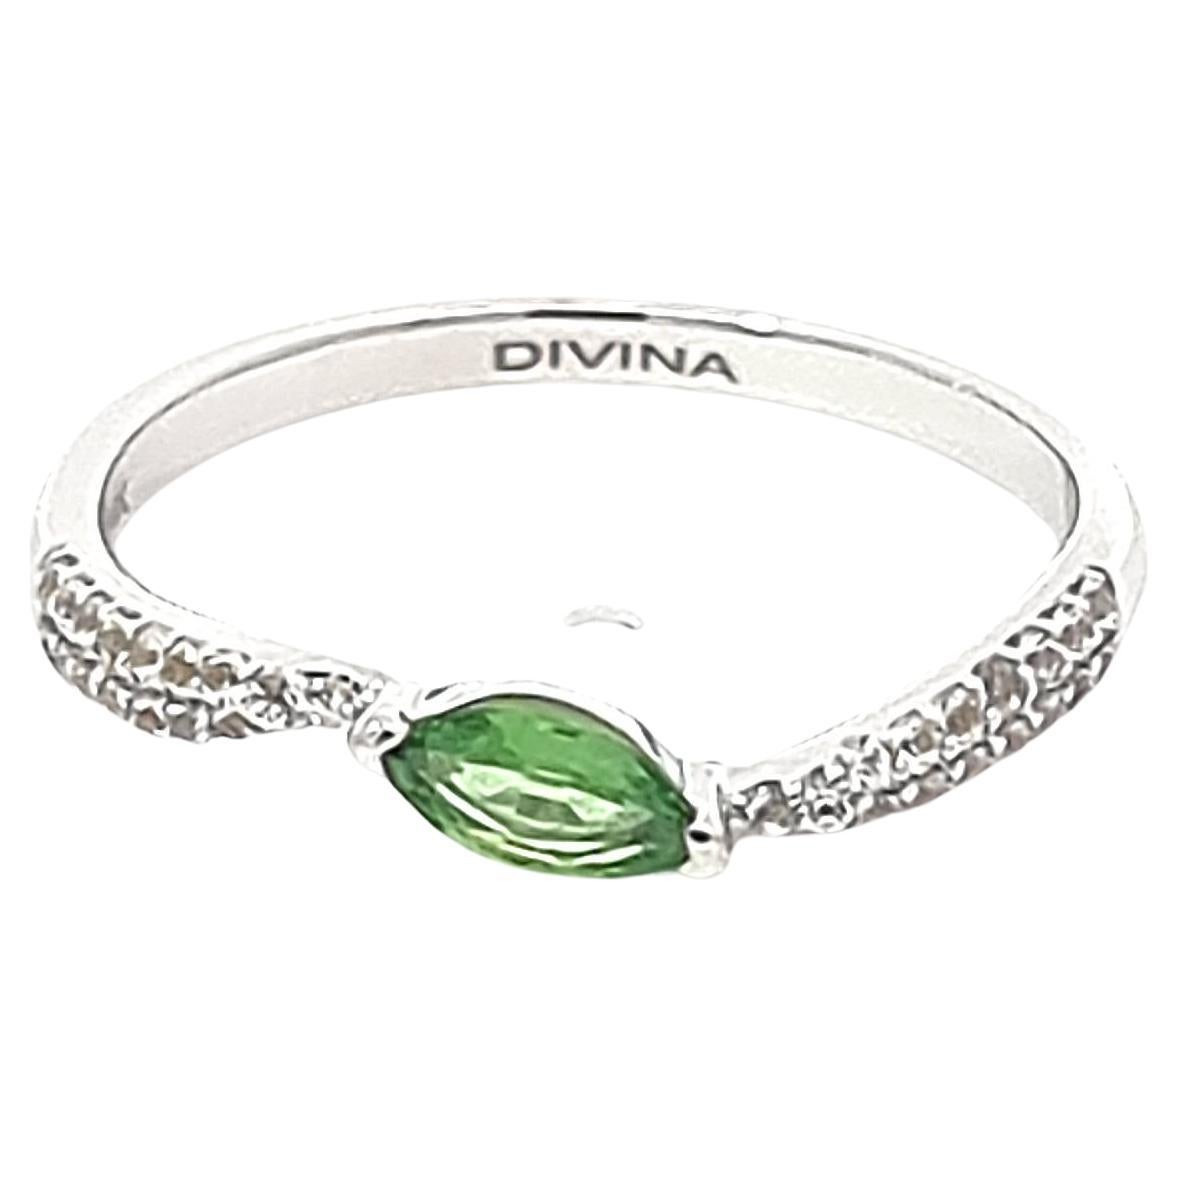 Marquise Tsavorite and White Round Sapphires set in White Gold Ring